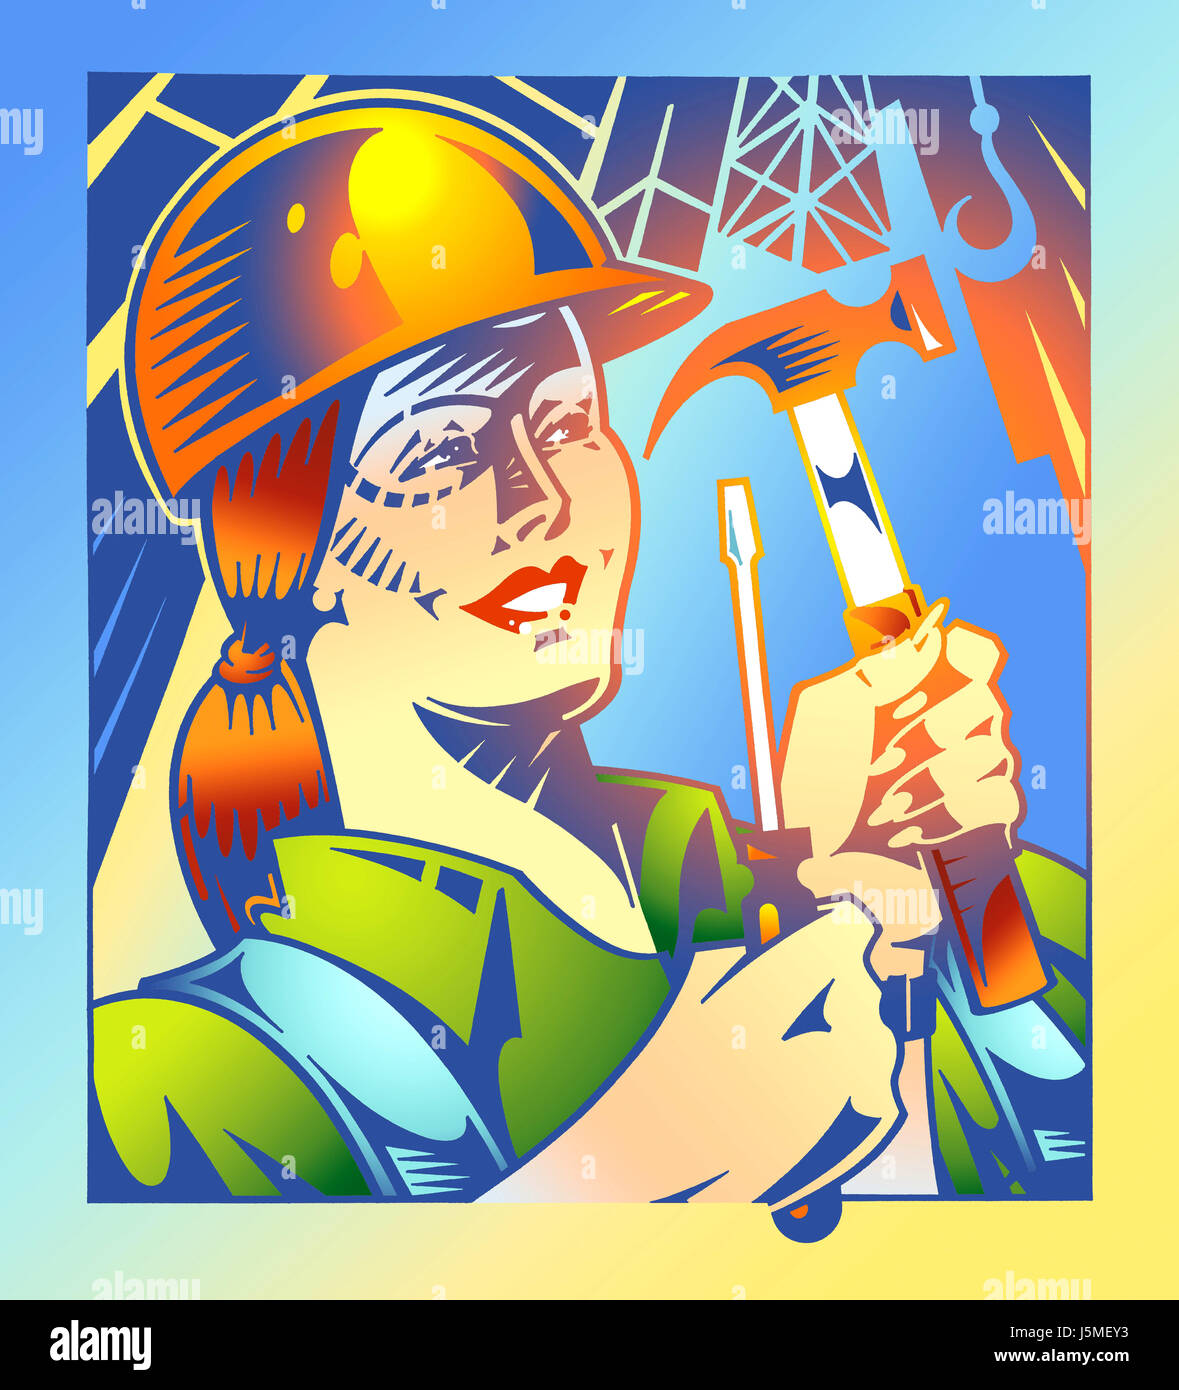 Woman holding tools Stock Photo